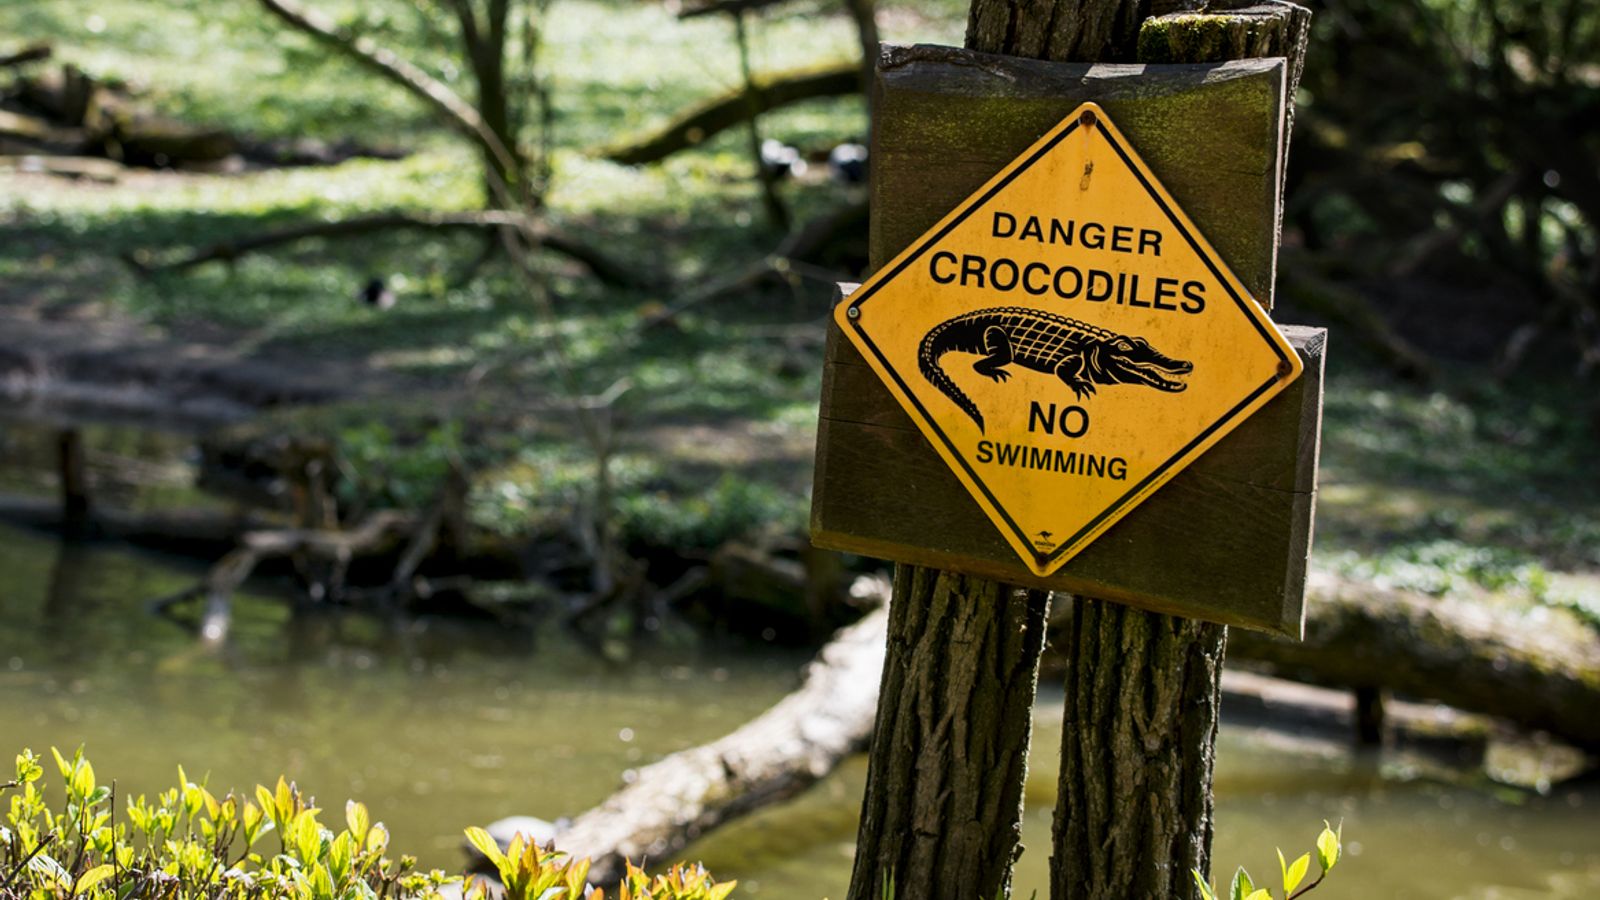 Crocodile attack: Remains found of 12-year-old girl attacked while swimming in remote Australian creek